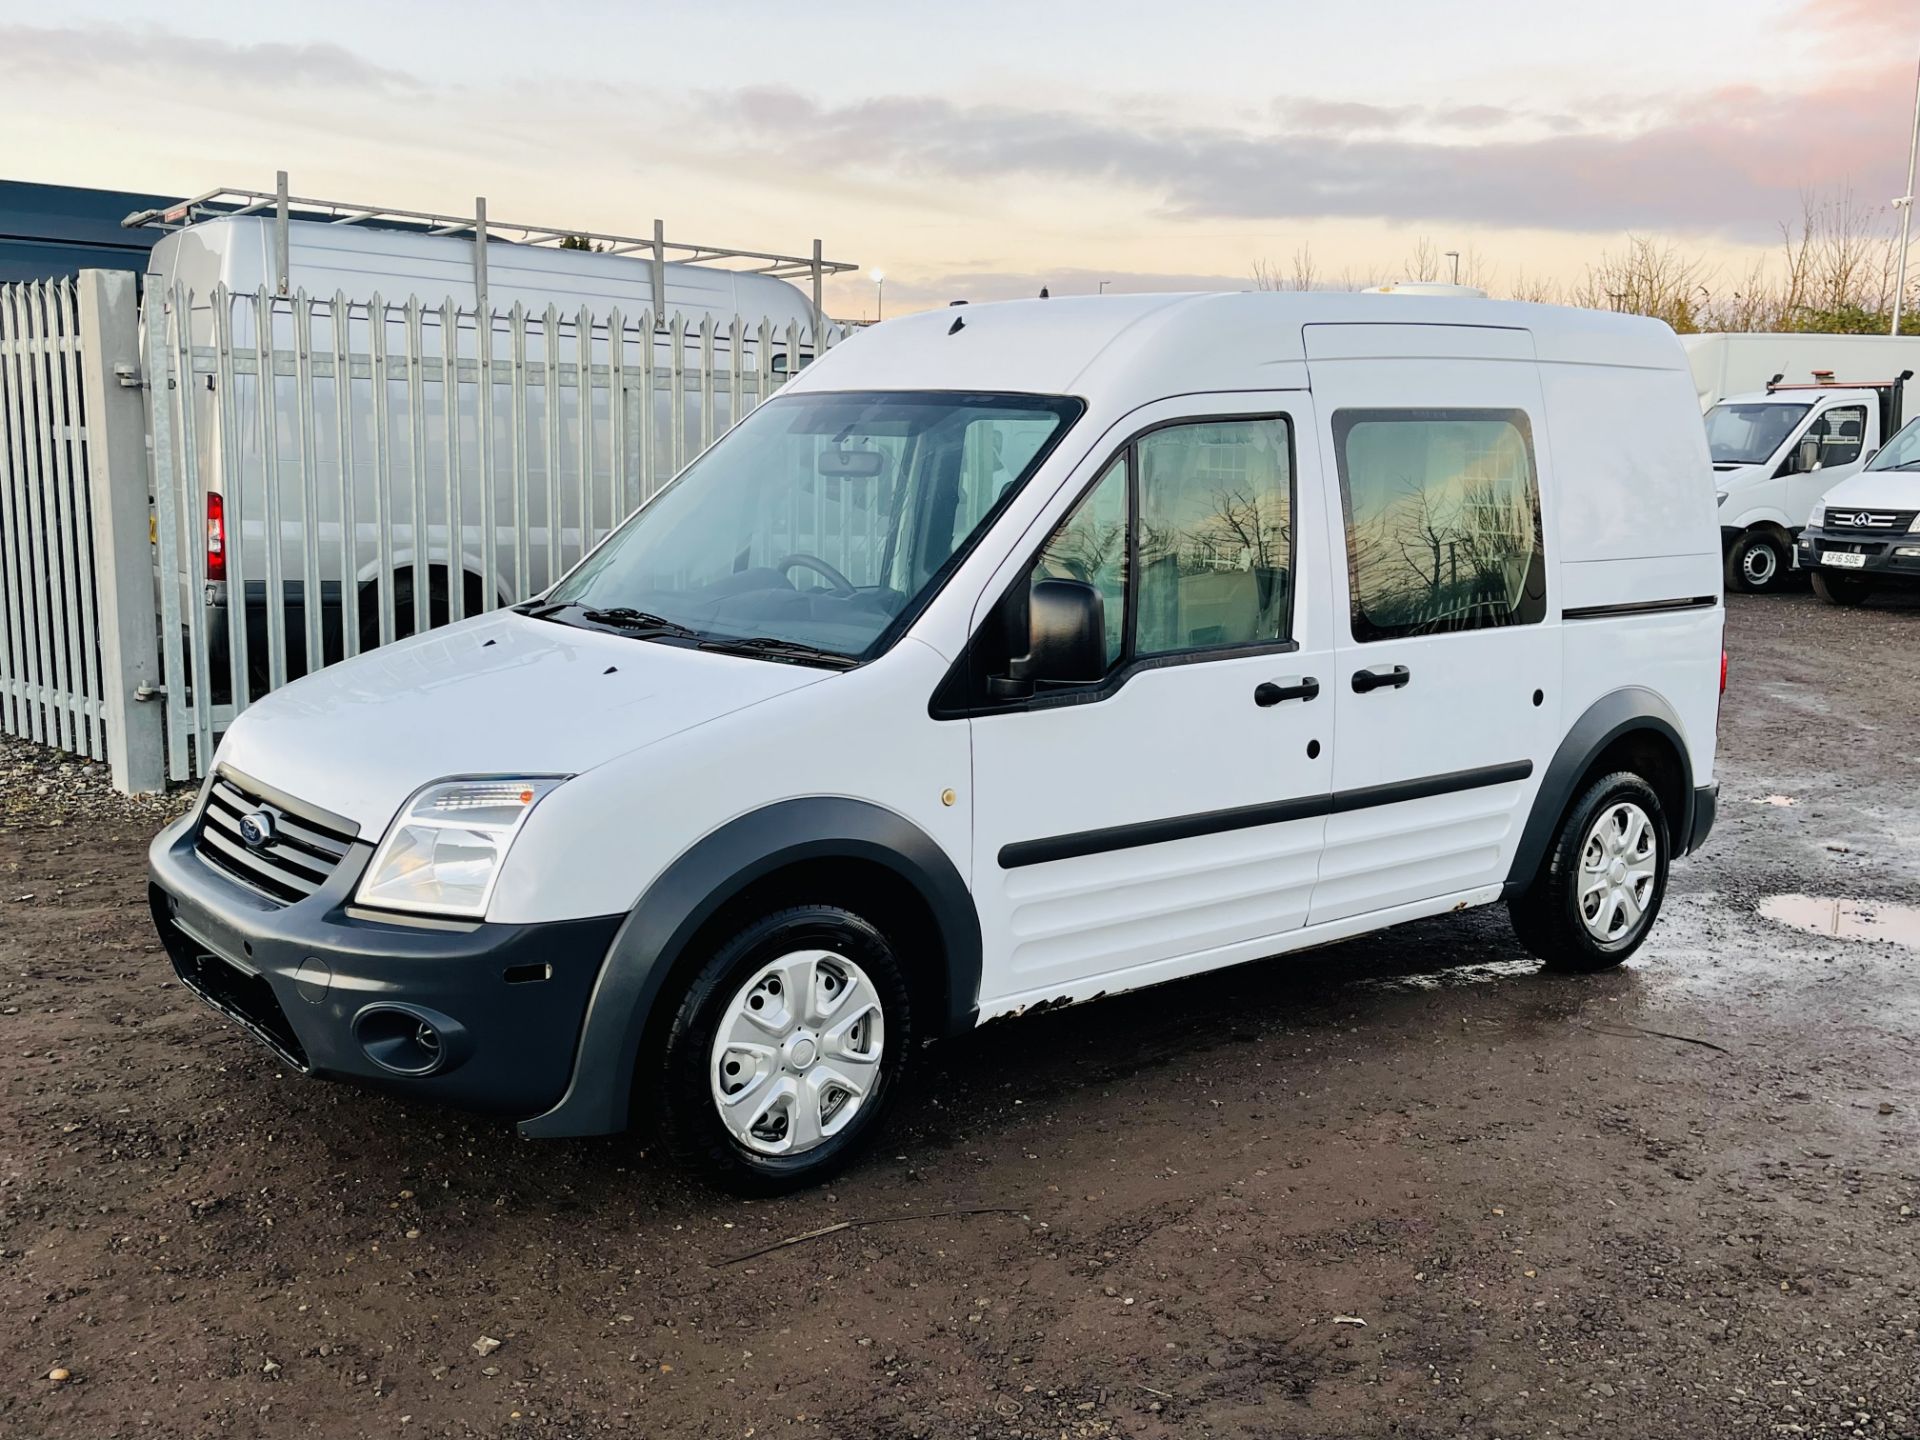 Ford Transit connect 1.8 TDCI LWB High Roof 2013 '13 Reg' A/C Elec pack - Image 5 of 21